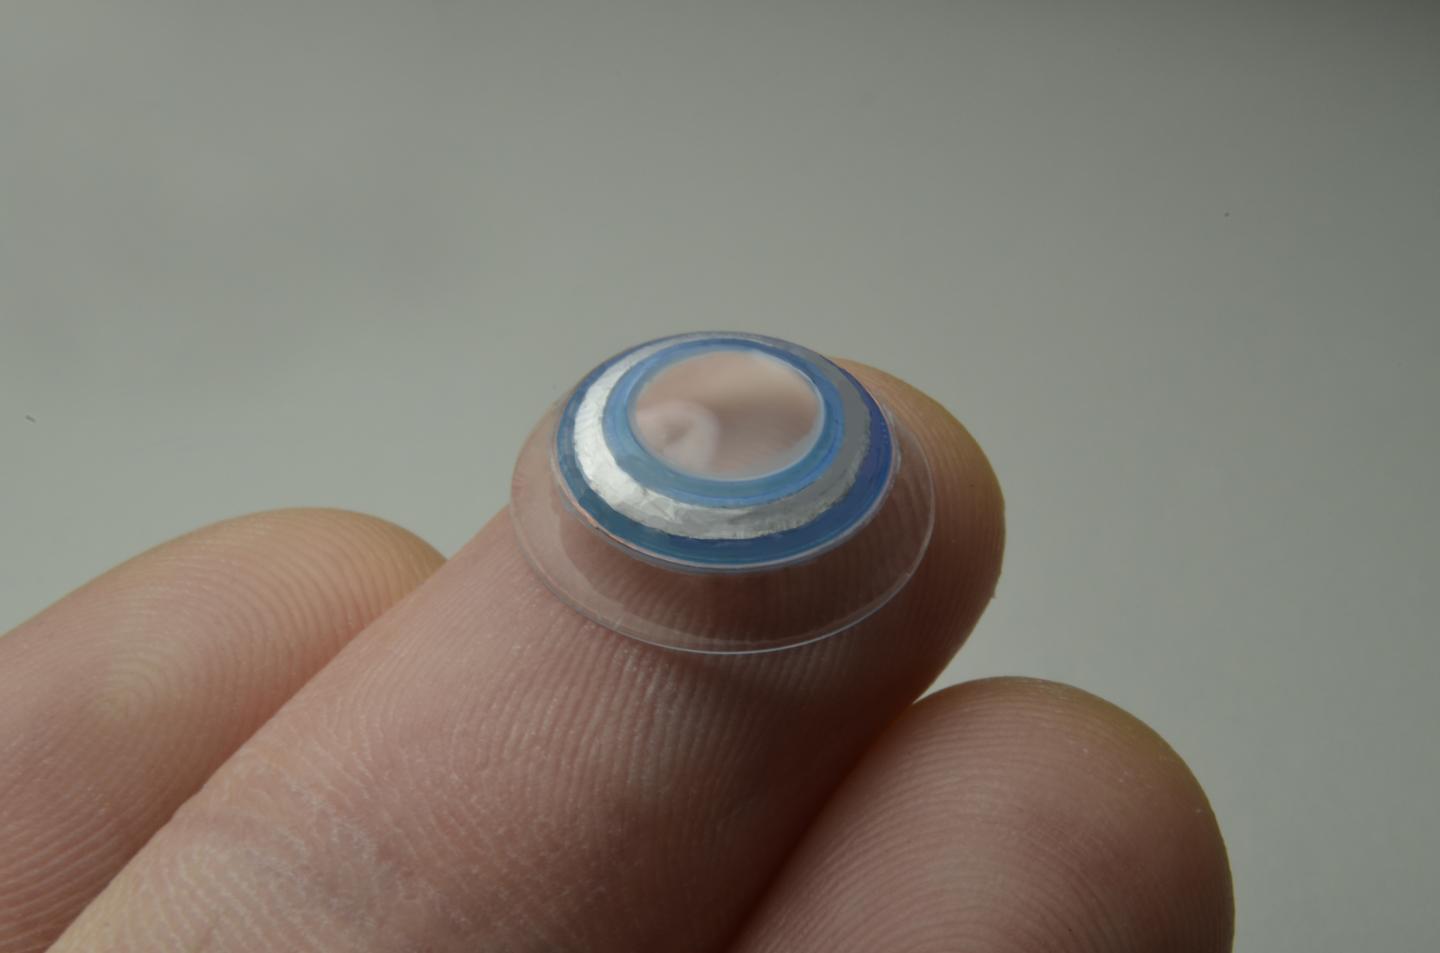 Contact Lens Device